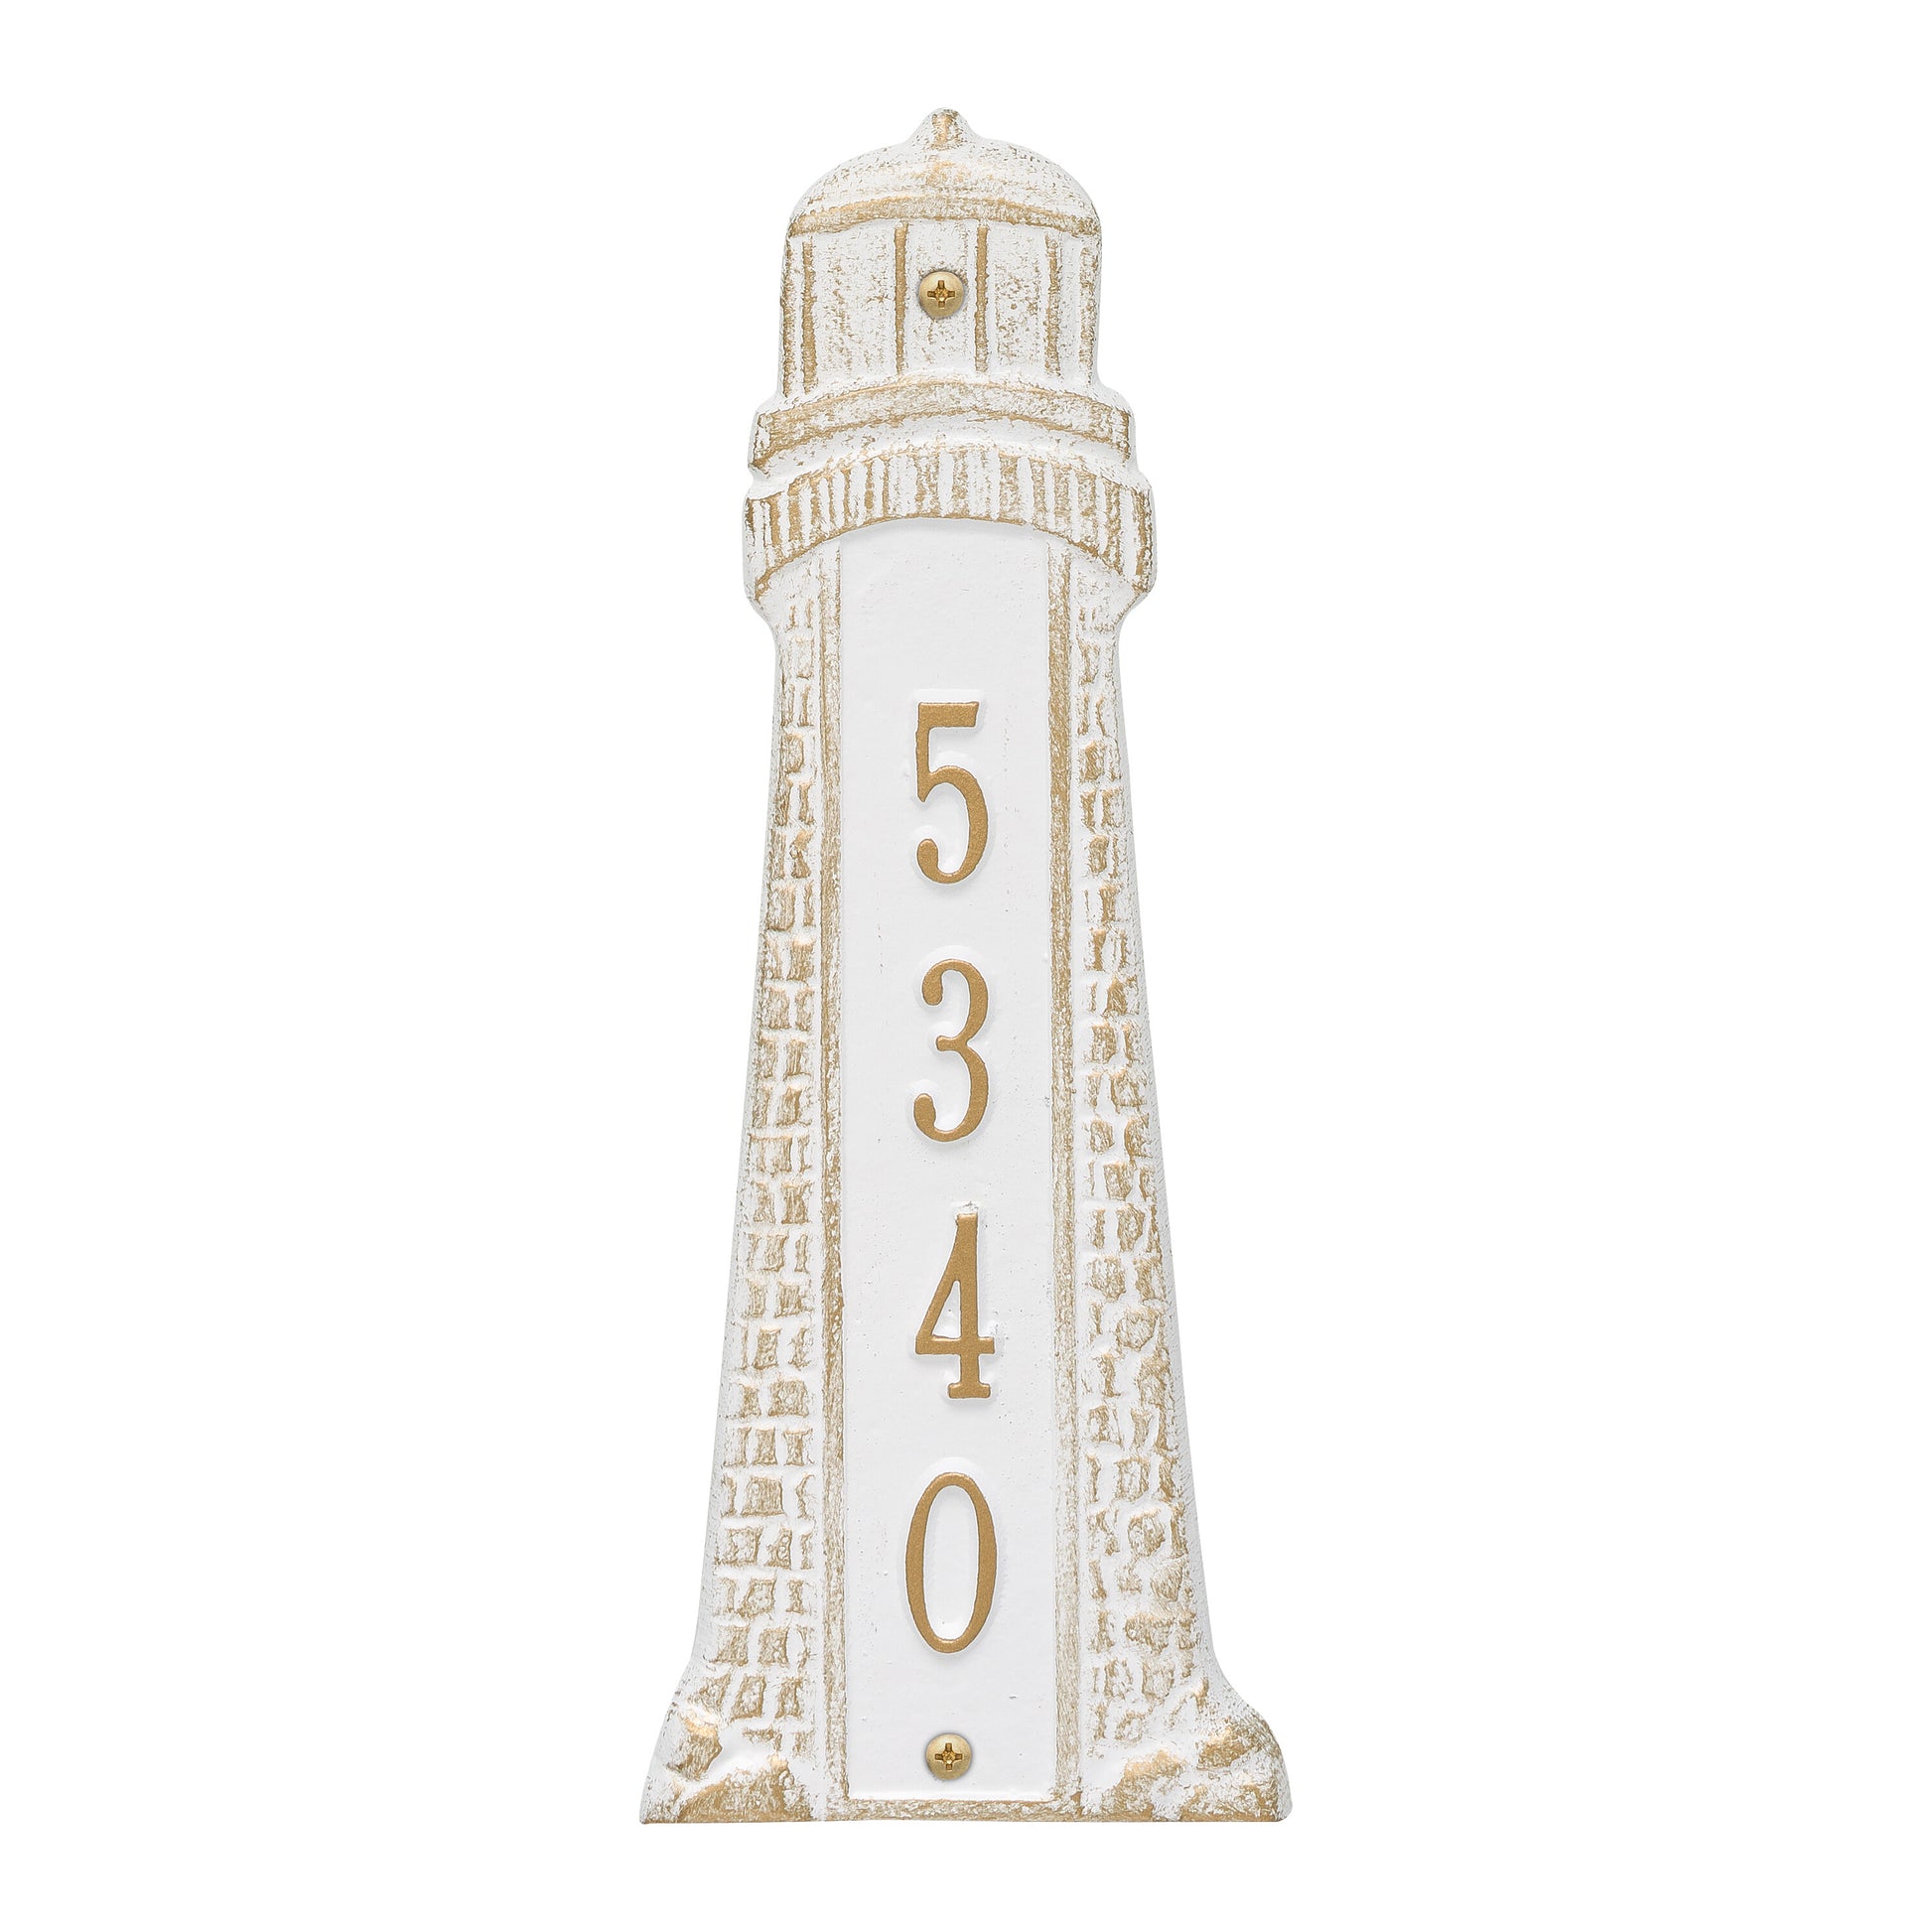 Lighthouse Vertical Plaque-Nautical Decor and Gifts